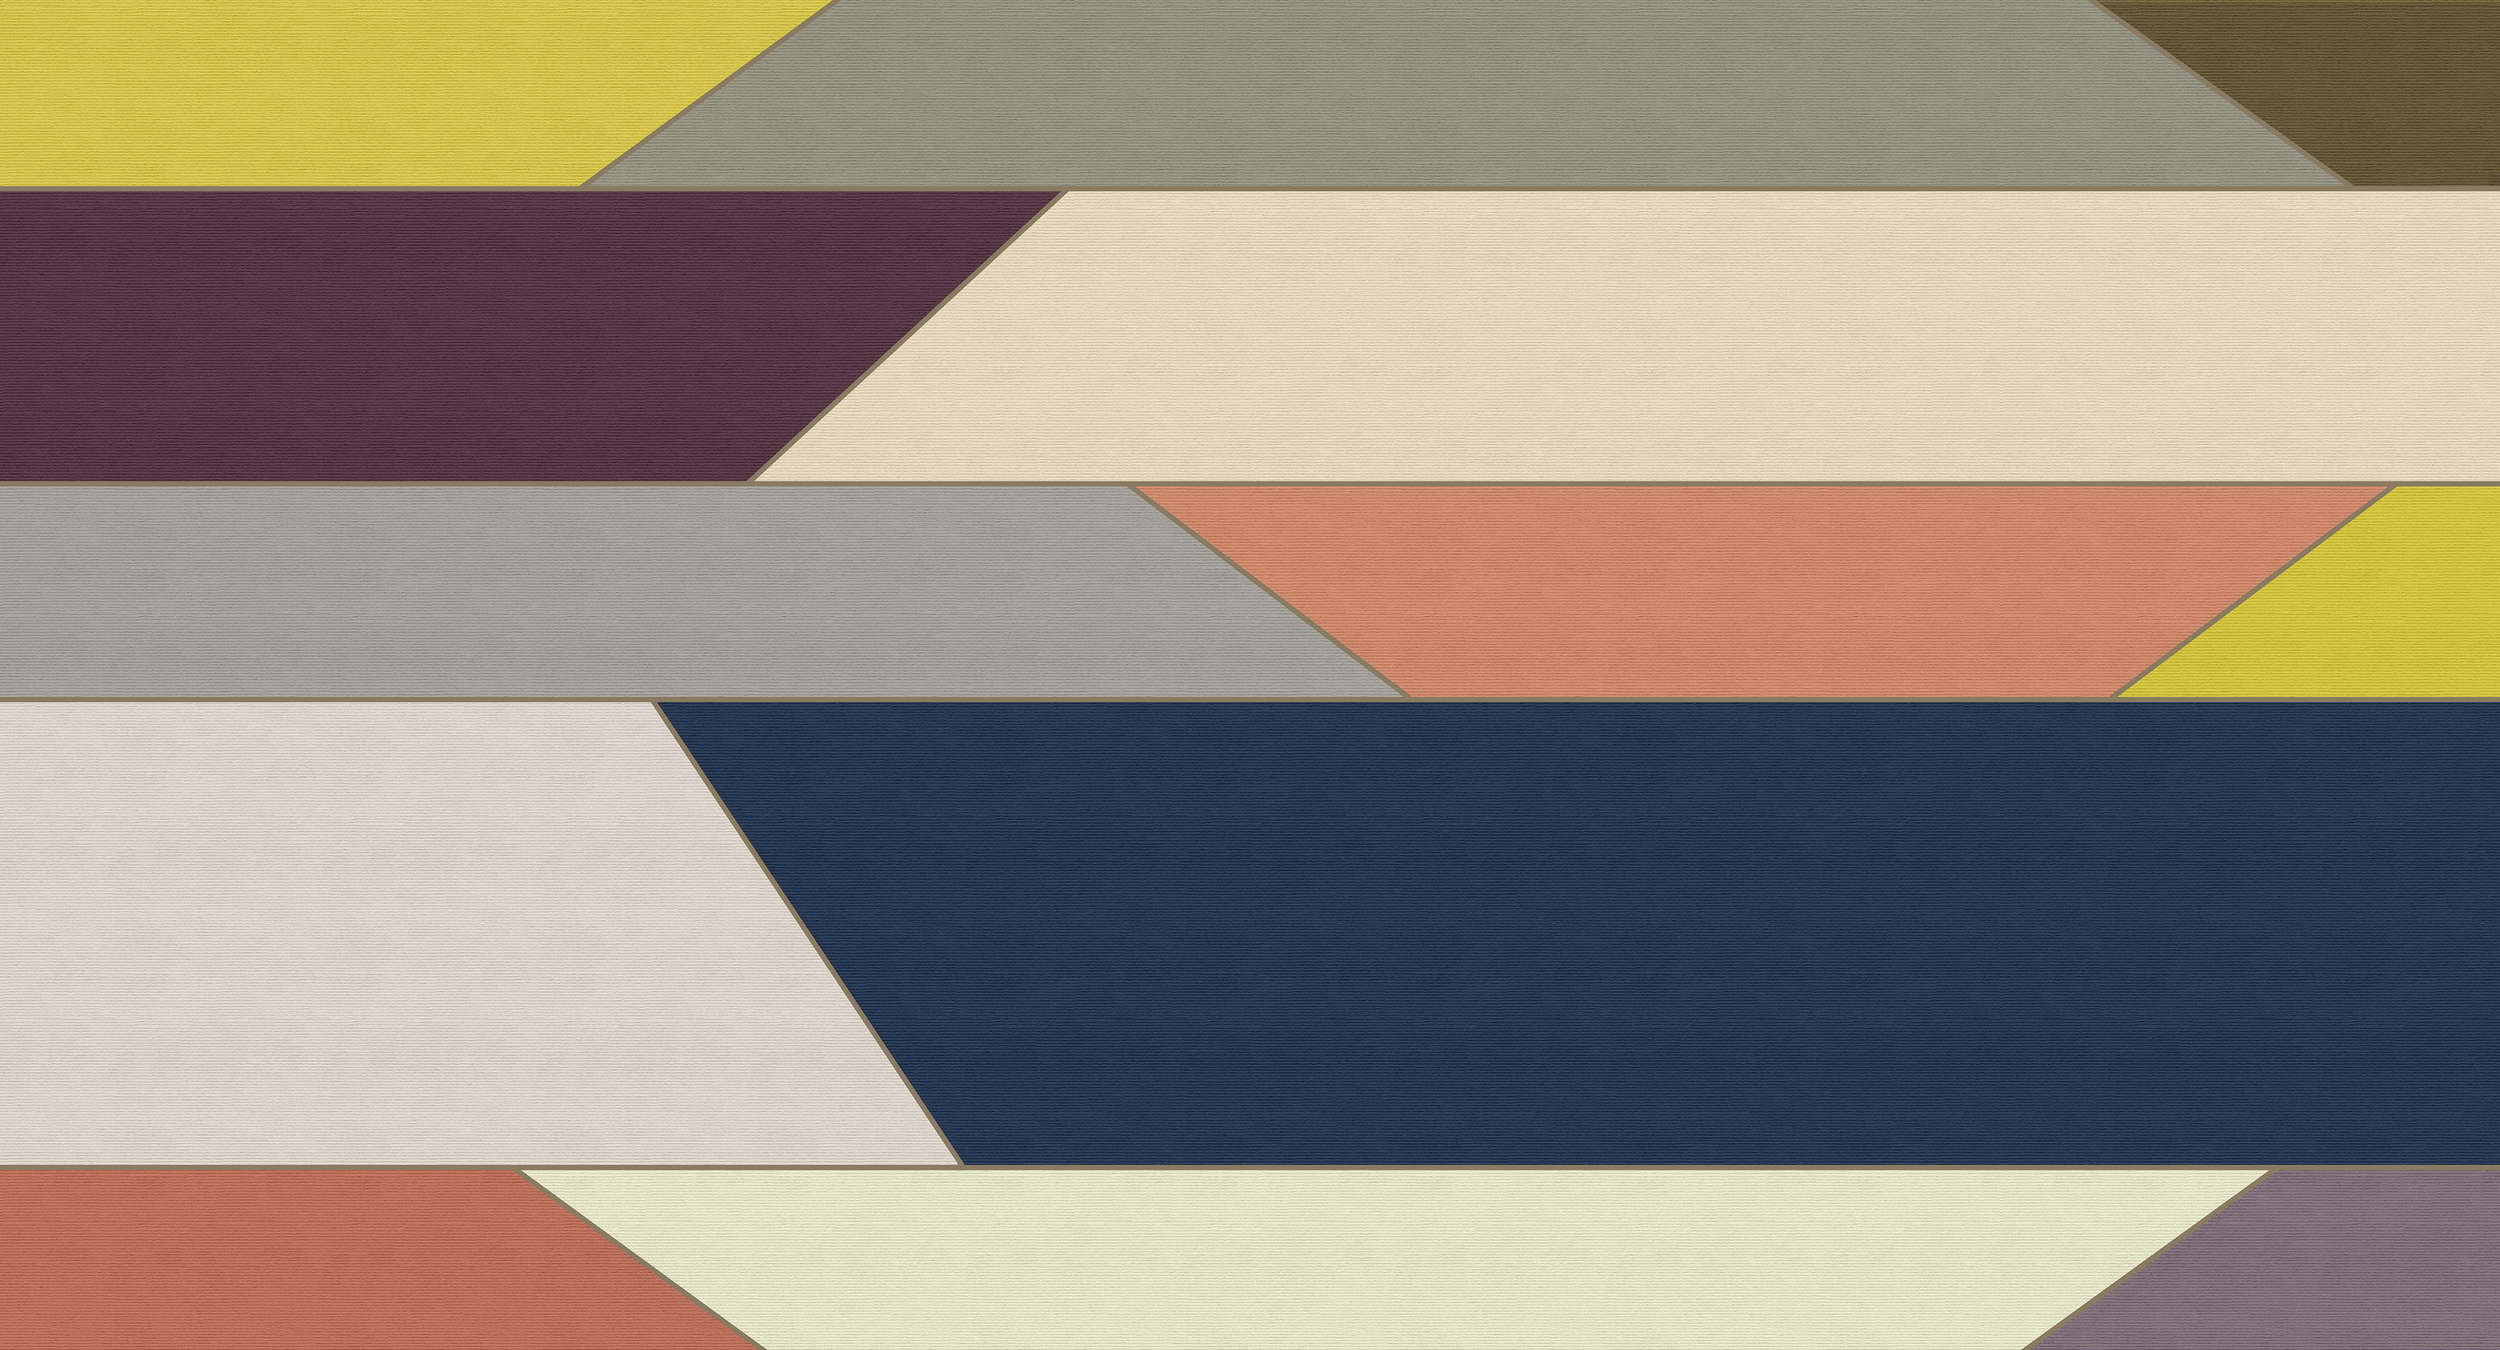             Geometry 1 - Photo wallpaper with colourful horizontal stripe pattern - ribbed structure - Beige, Blue | Premium smooth fleece
        